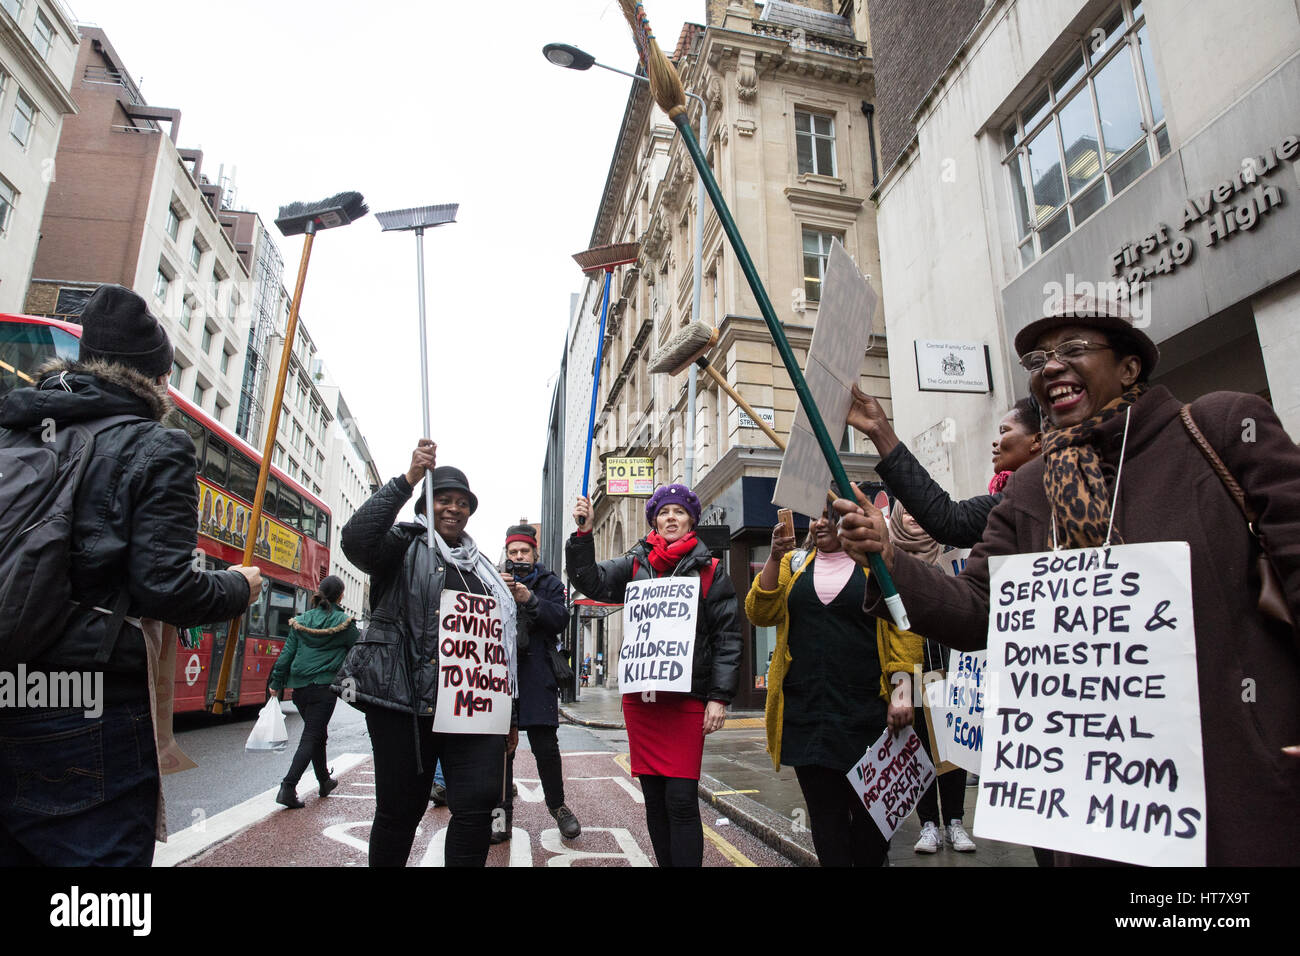 London, UK. 8th Mar, 2017. Women from Global Women's Strike and Women's Strike UK sweep the street as part of a protest for the world's mothers and children outside the Central Family Court in Holborn on International Women's Day and as part of an International Women's Strike. Brooms have been adopted as a symbol by women in the UK on the basis that brooms are strong when all strands work together. Credit: Mark Kerrison/Alamy Live News Stock Photo